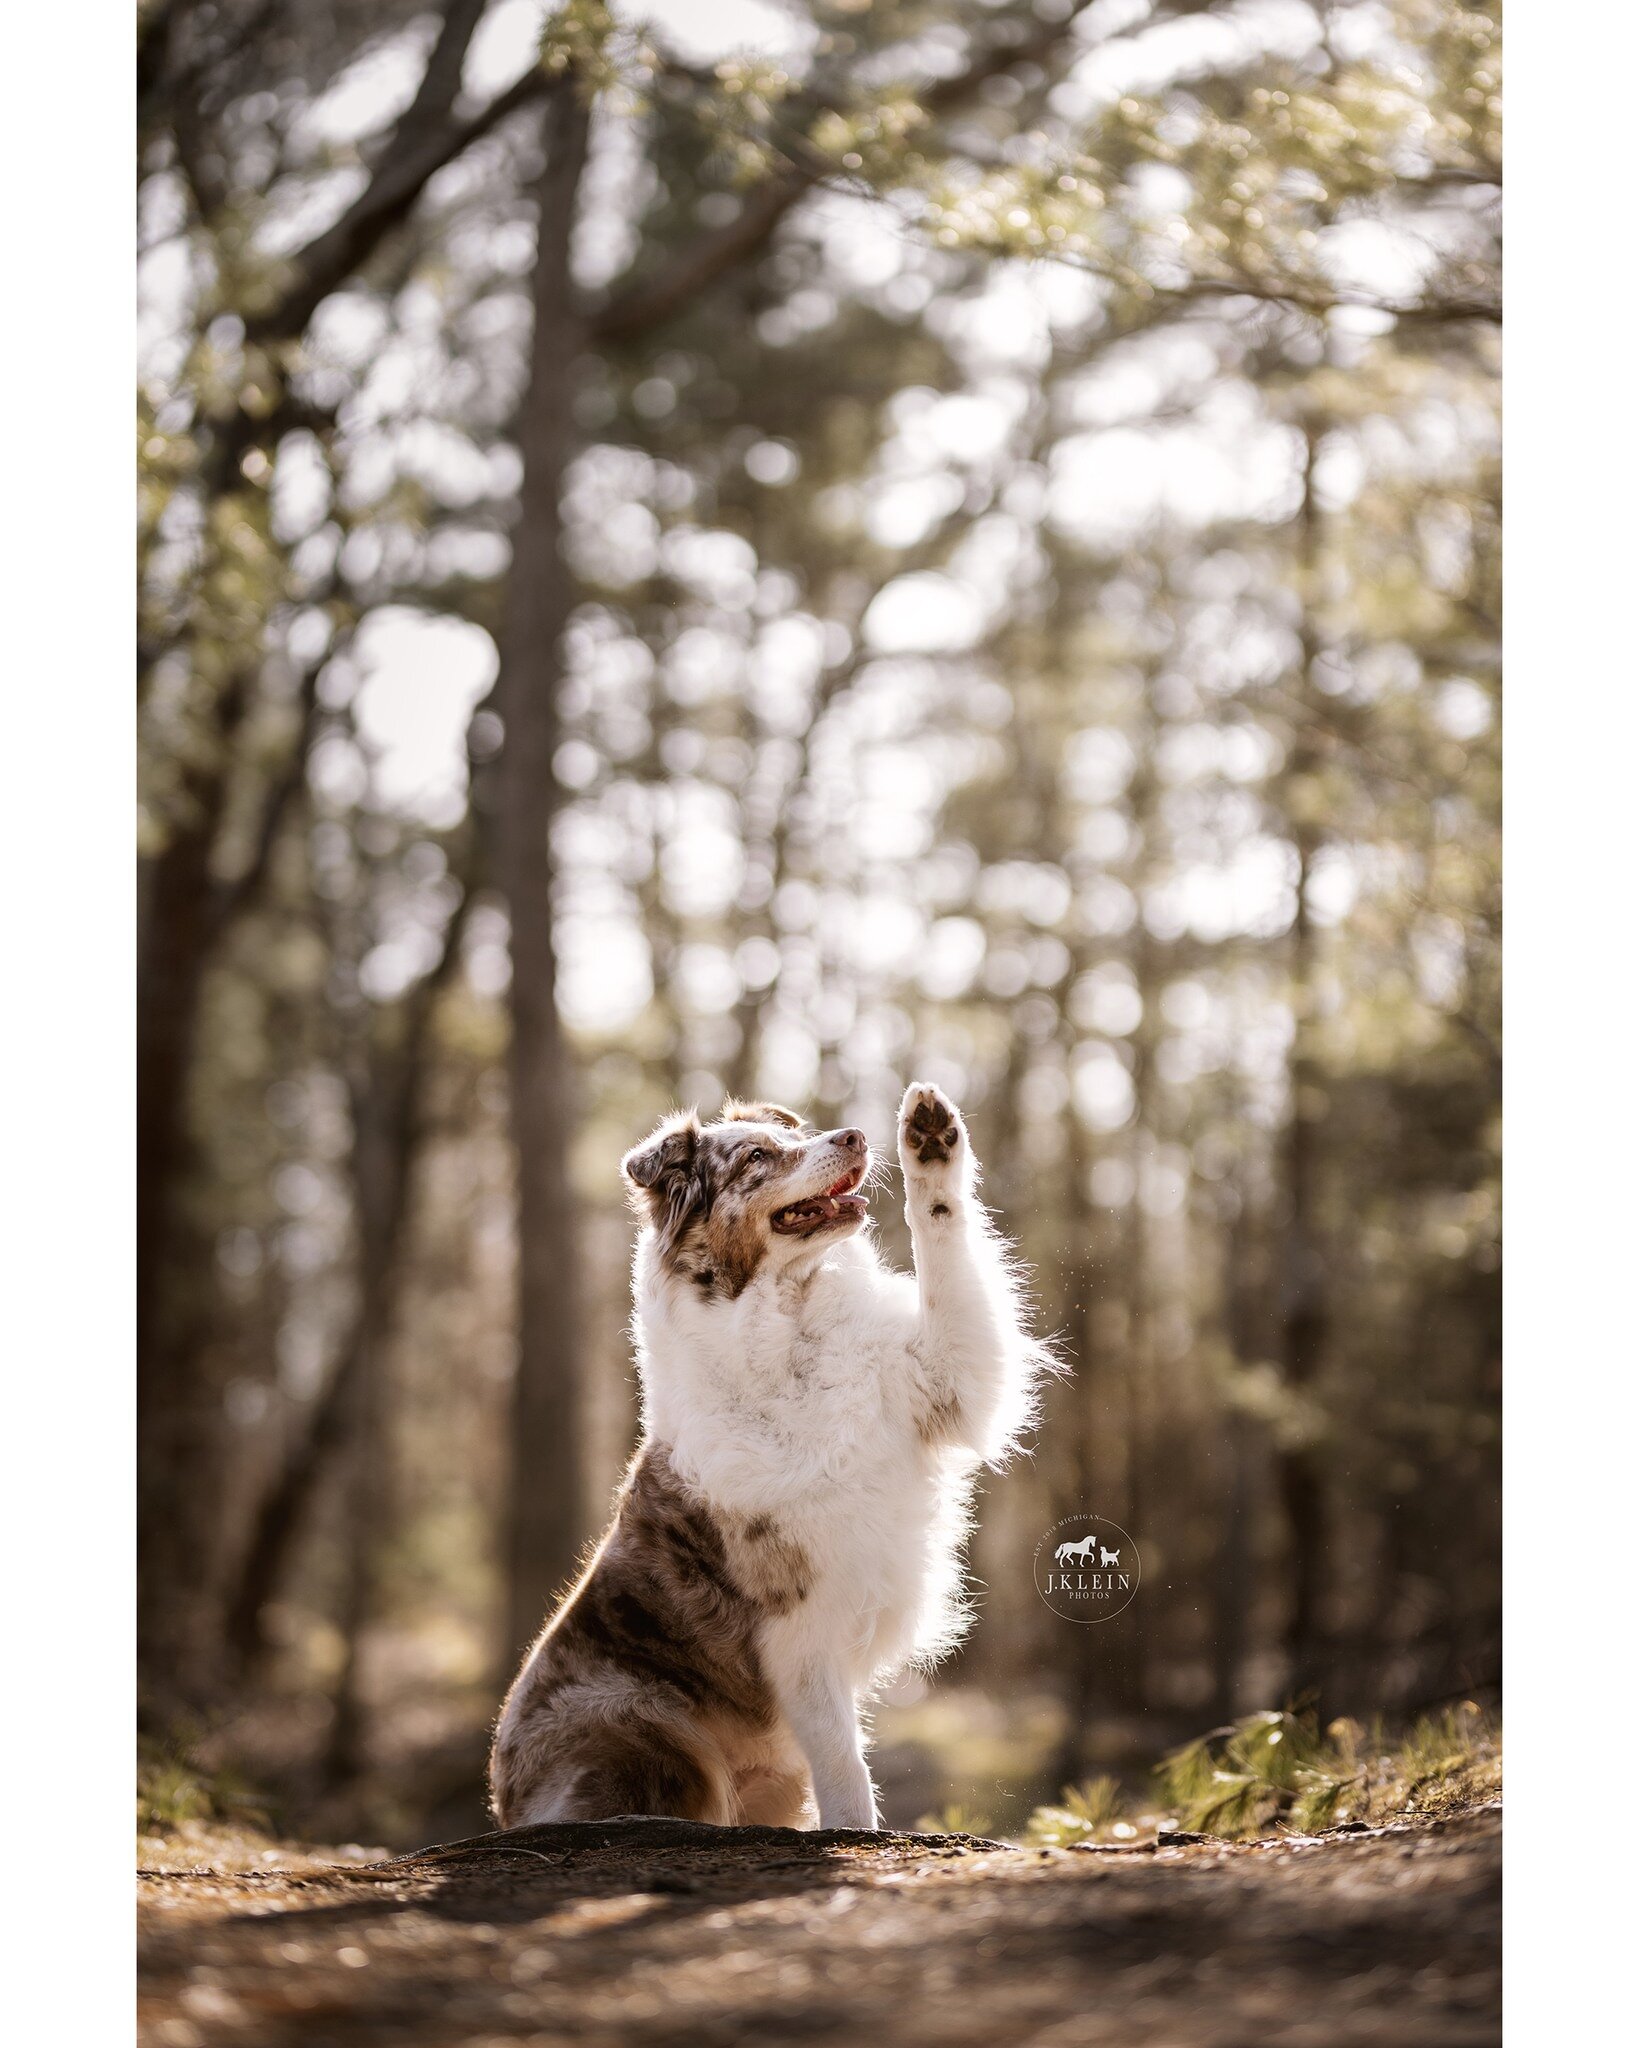 // That Spring sunshine feels so good after a long Winter surviving under the lake effect clouds. ☀️ 

I have availably over the next month for dog sessions along the wooded trails here in Muskegon. If you have been dreaming of having professional ph